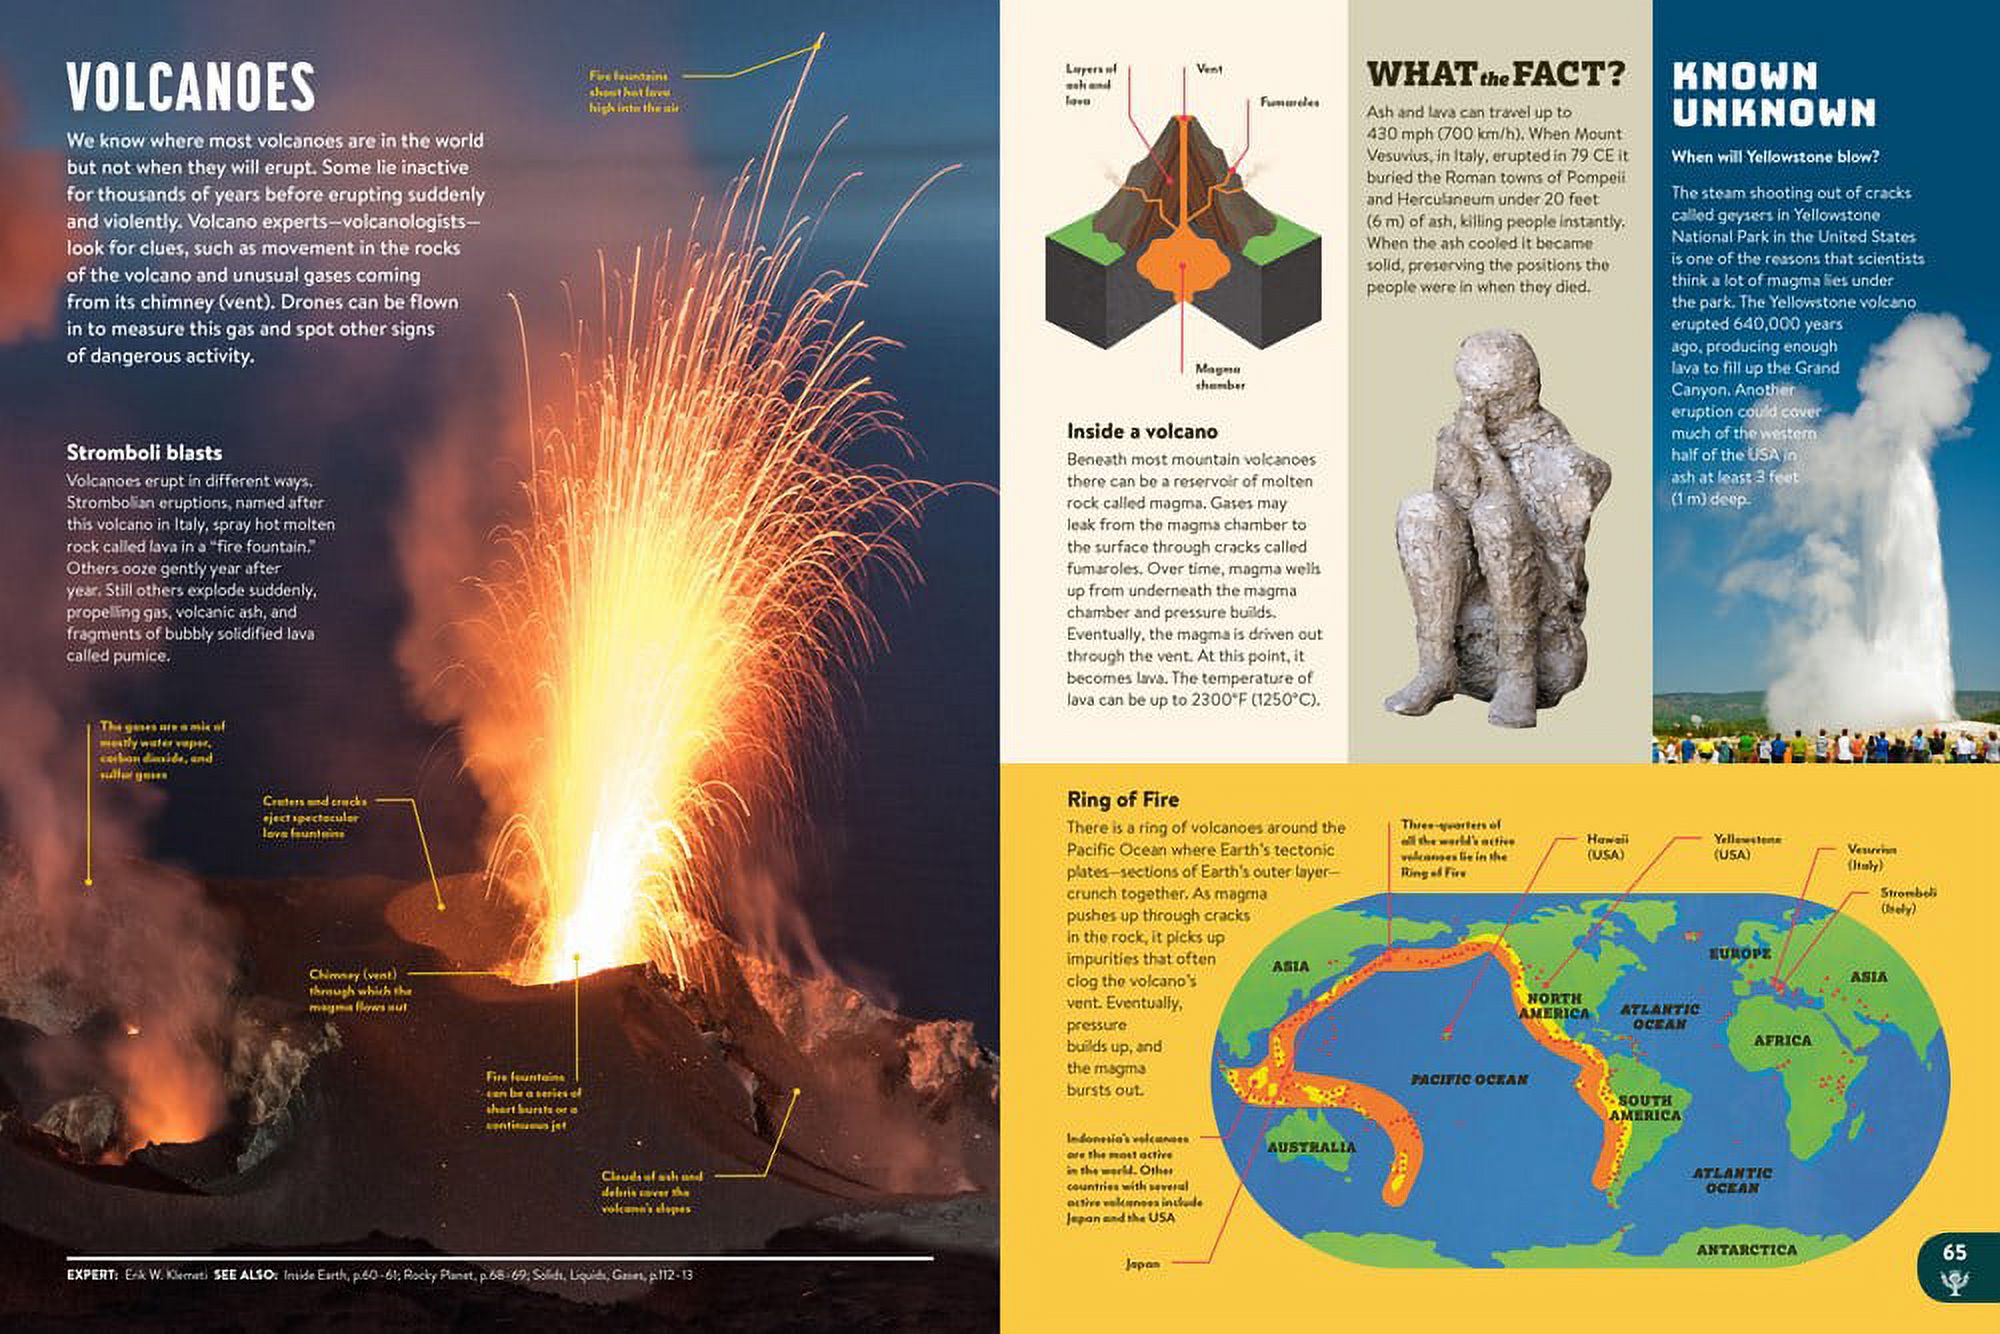 Britannica All New Kids' Encyclopedia: What We Know & What We Don't (Hardcover) - image 3 of 8